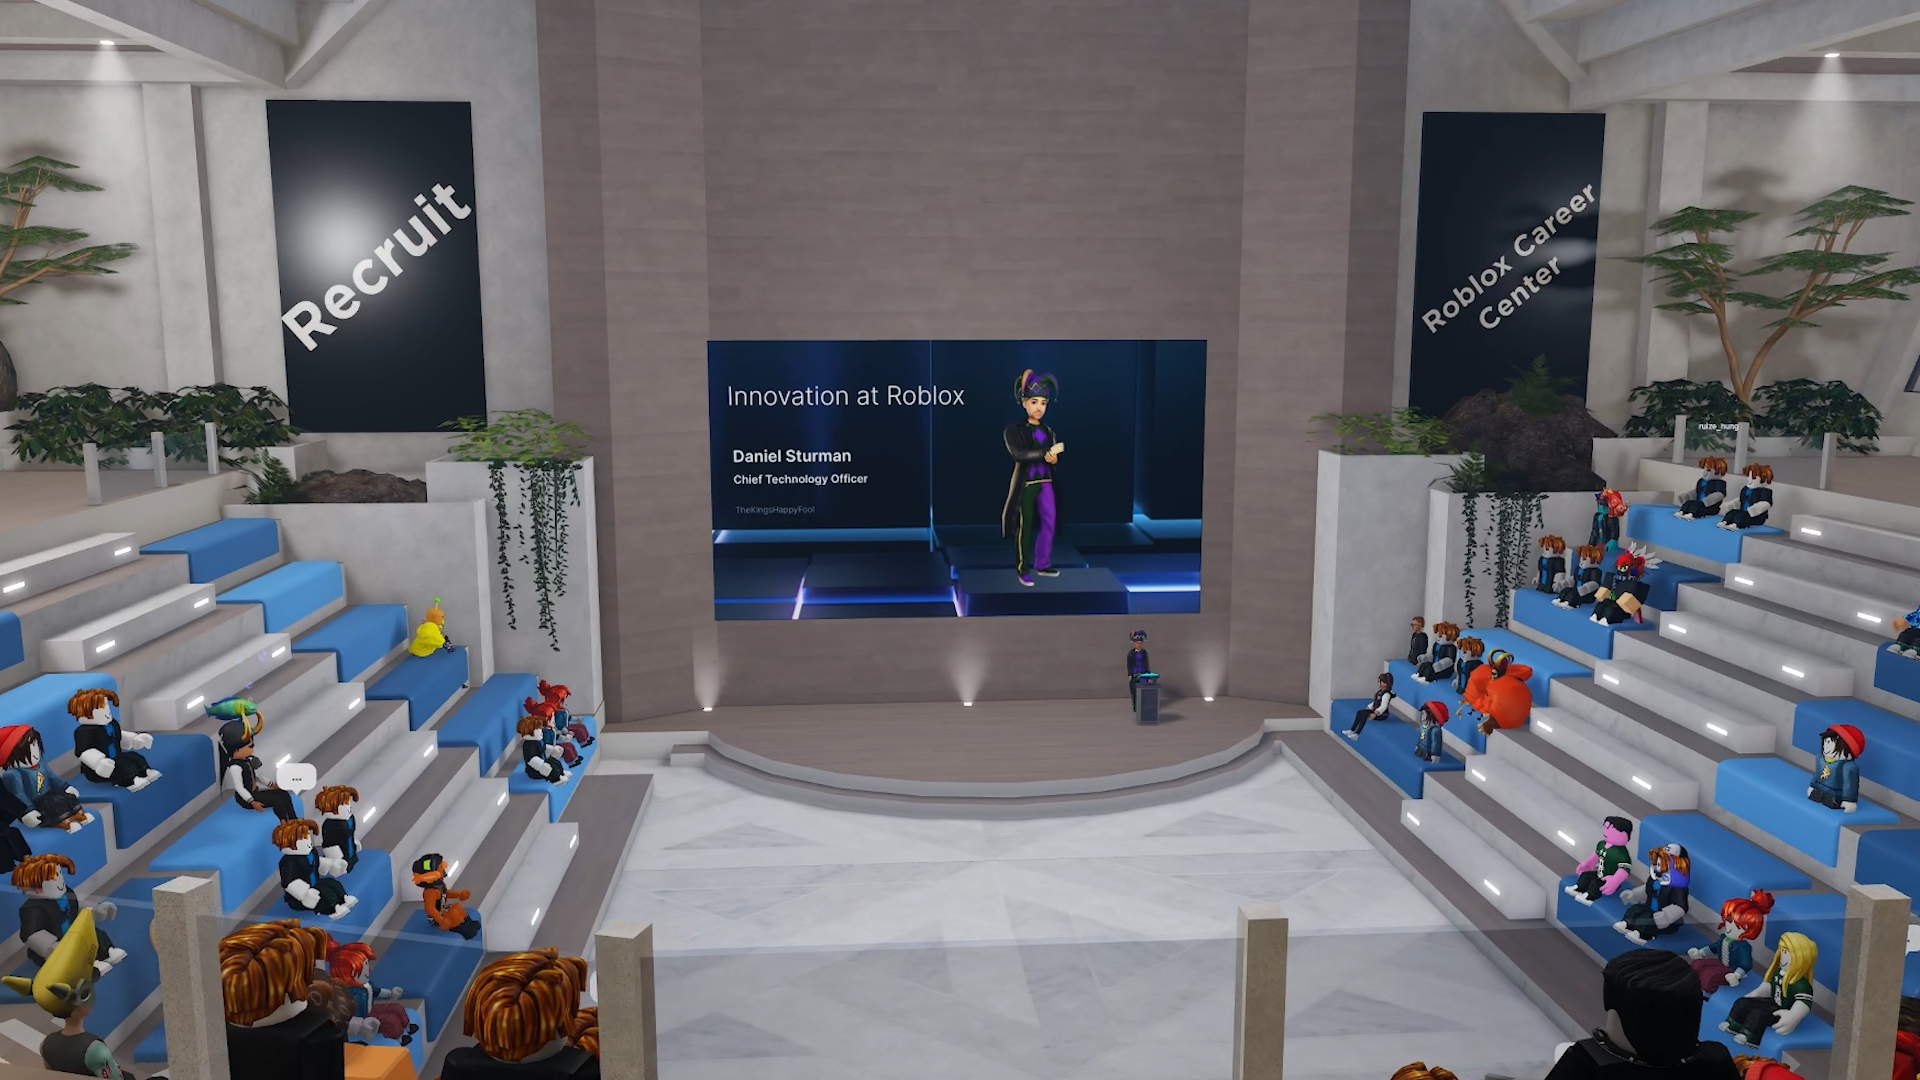 Roblox to Hold Job Interviews in Roblox